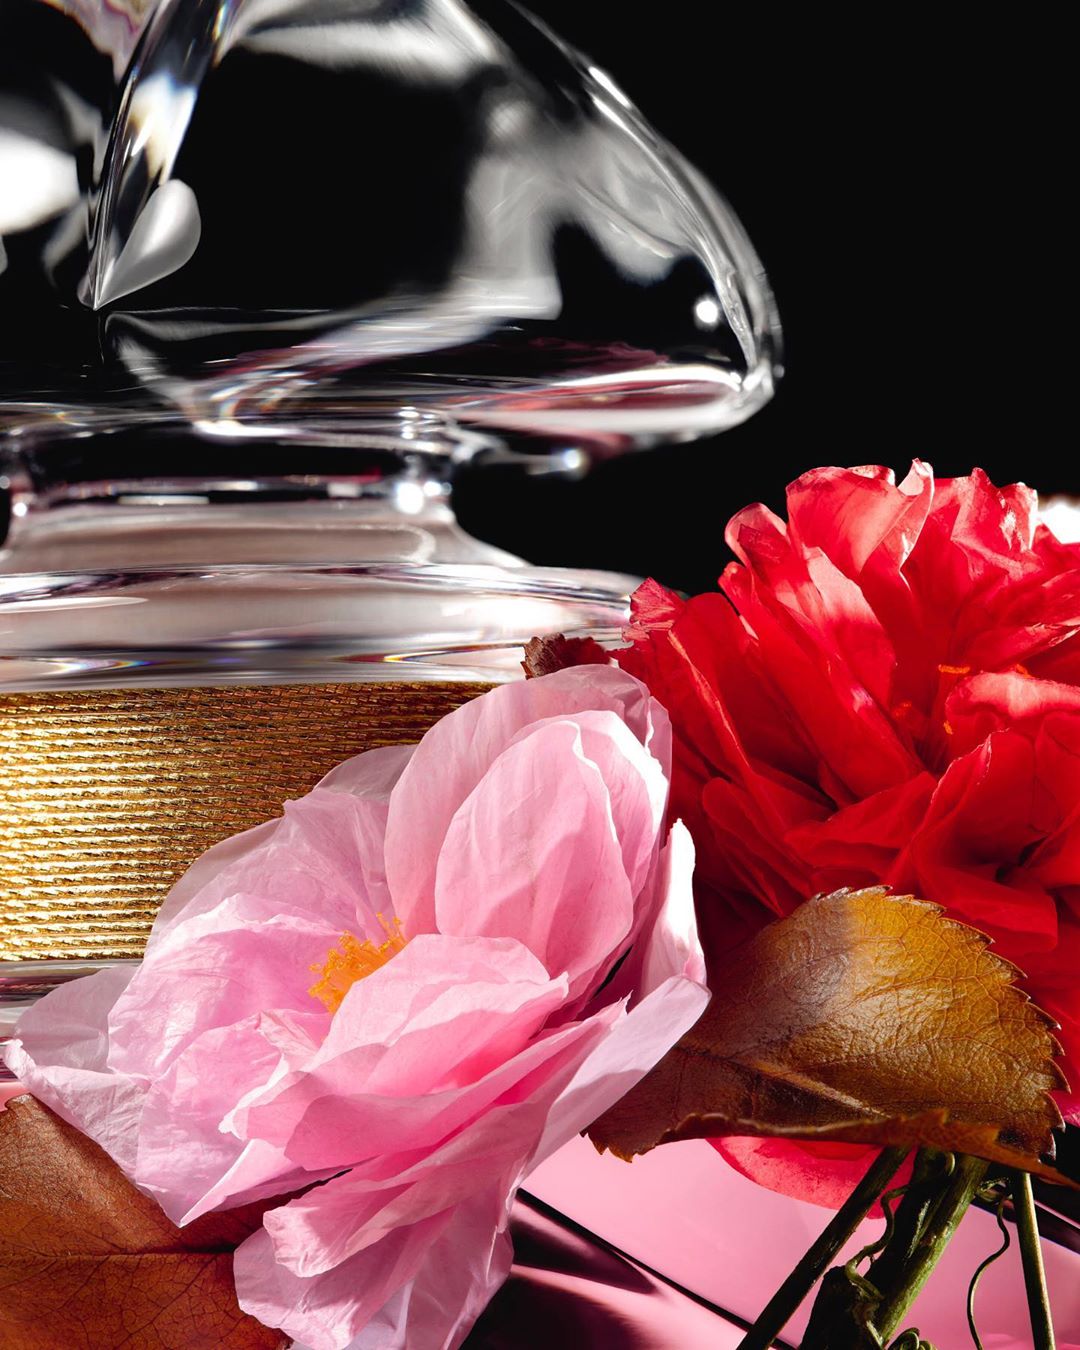 Guerlain - Mon Guerlain Bloom of Rose Prestige Edition: a sublime floral symphony.

From the iconic creations of yesteryear to the prestige editions of today, art has always been a strong source of in...